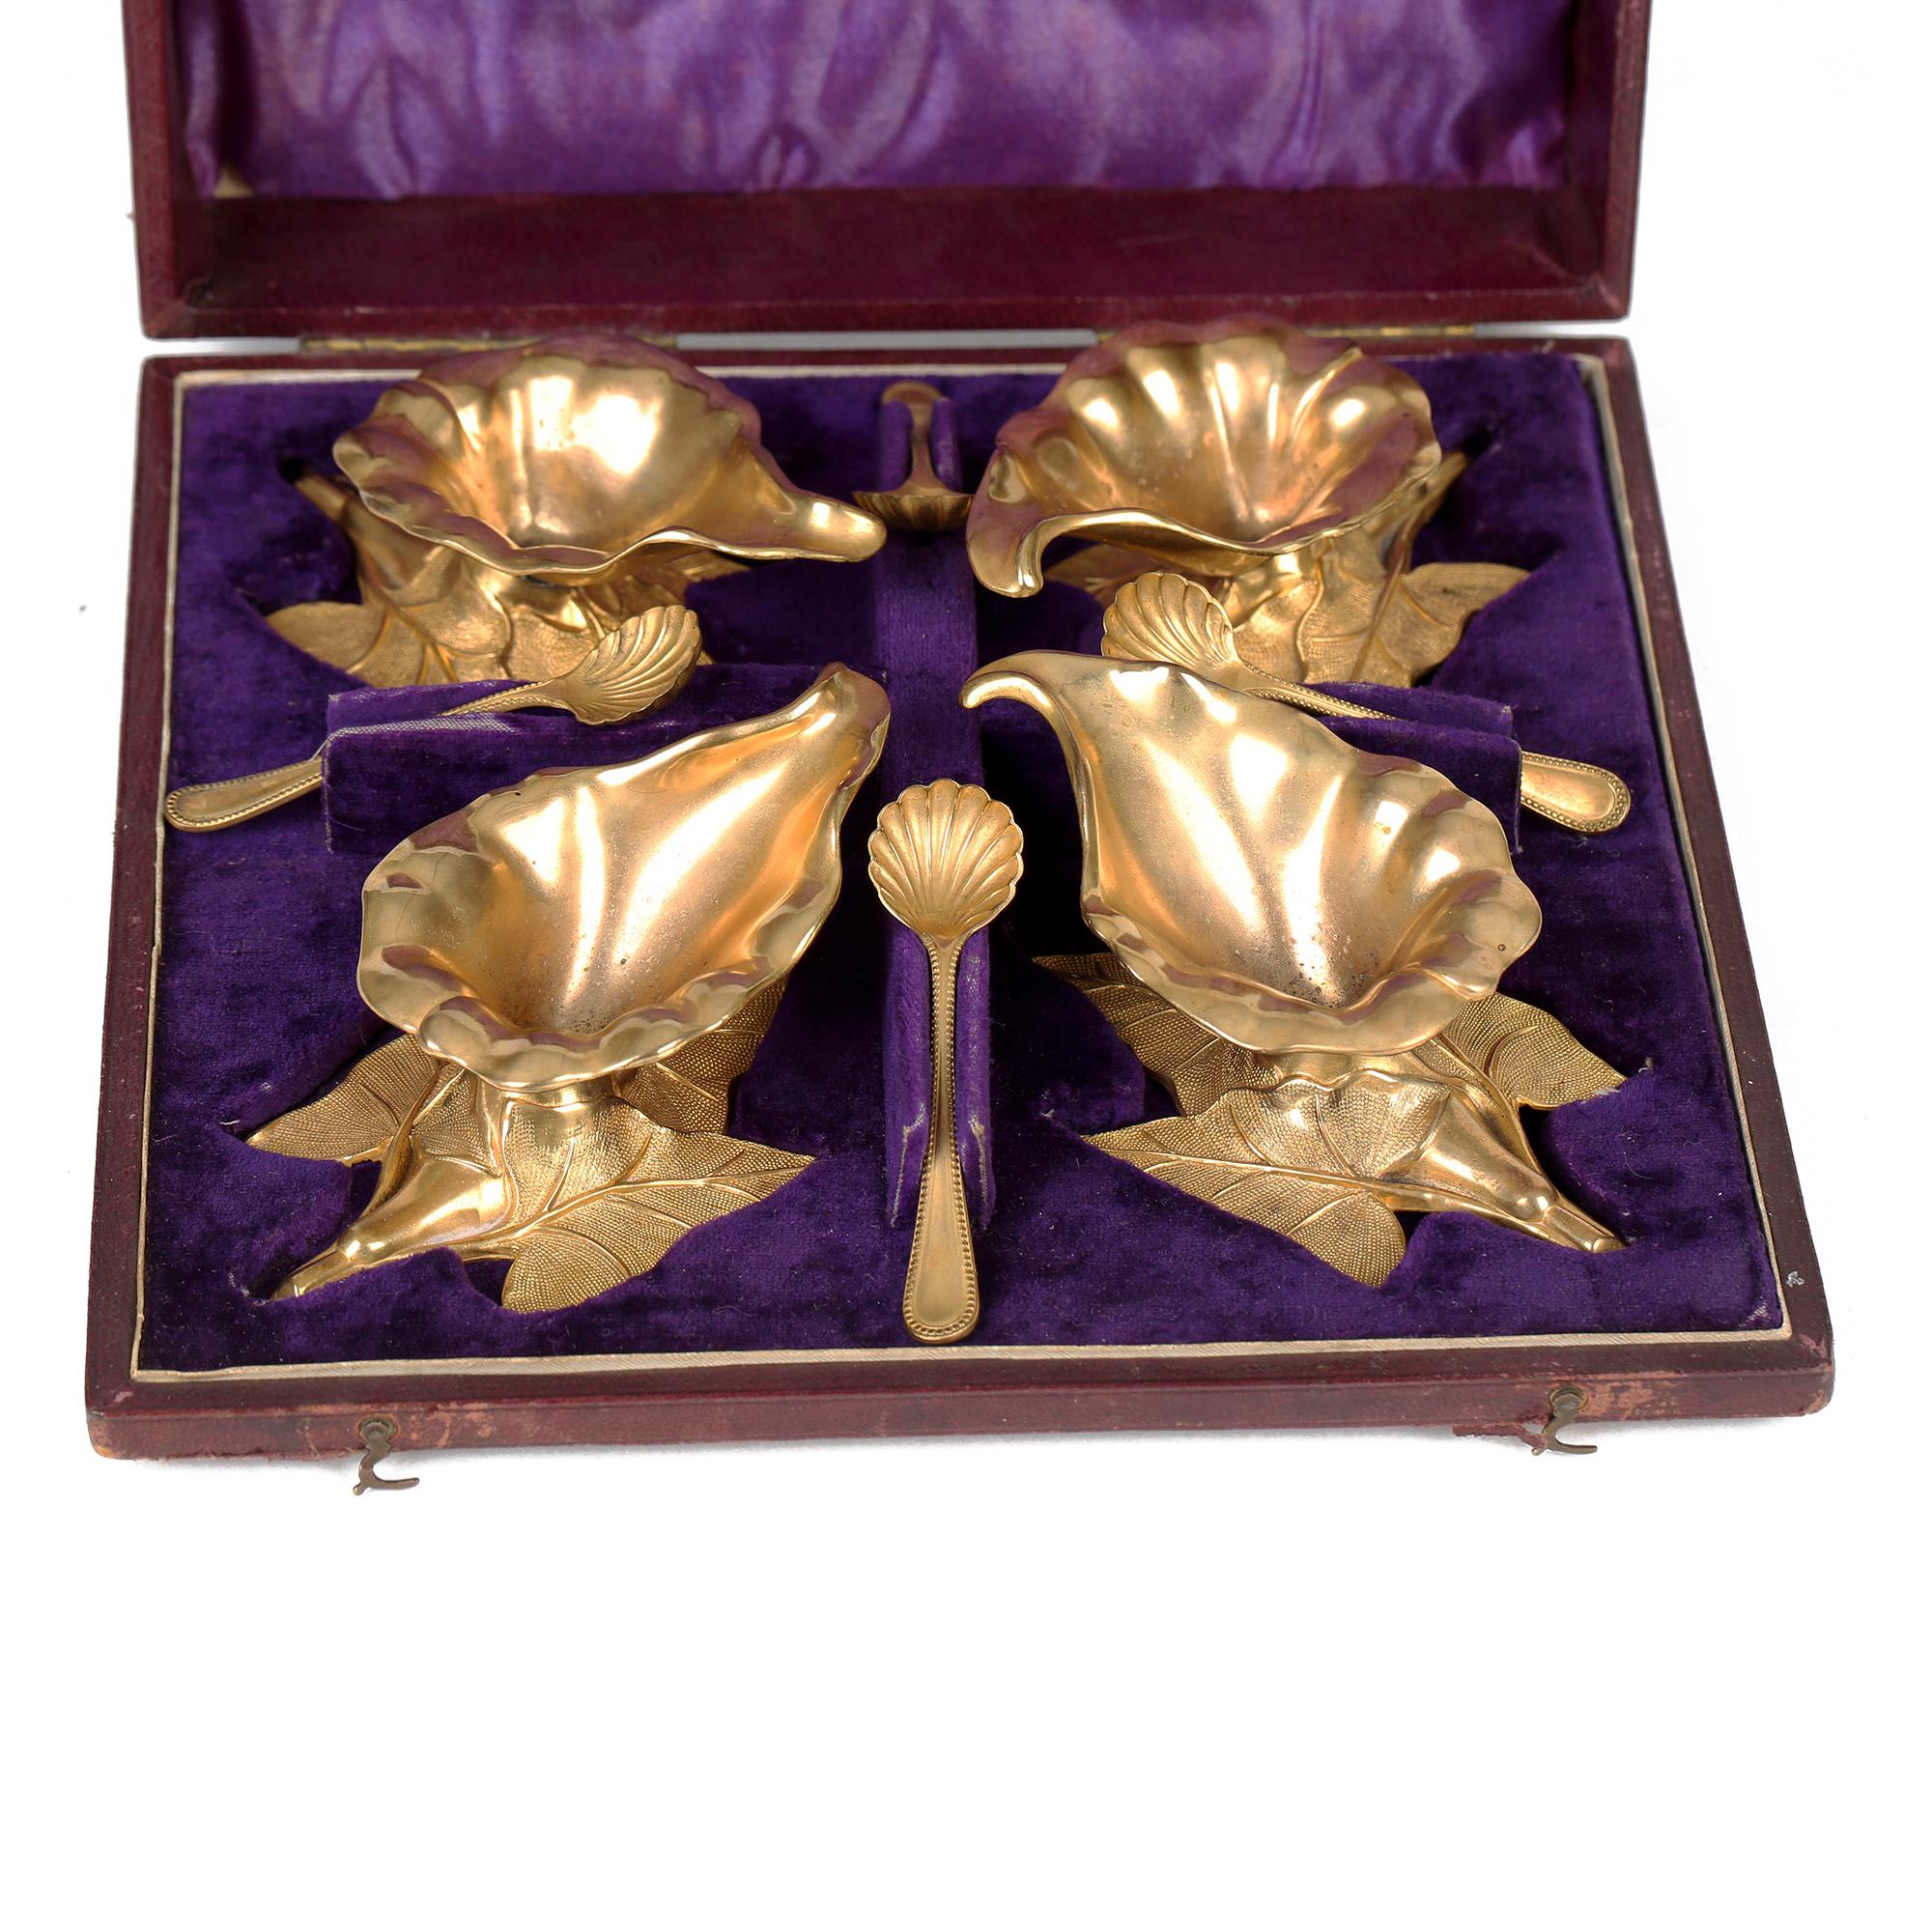 A very rare and unusual British cased set four gilded metal salts and spoons formed as flowerheads dated 1870. The decorative salts are formed as flower heads supported on a three leaf base and are presented in a fitted leather cover case with a